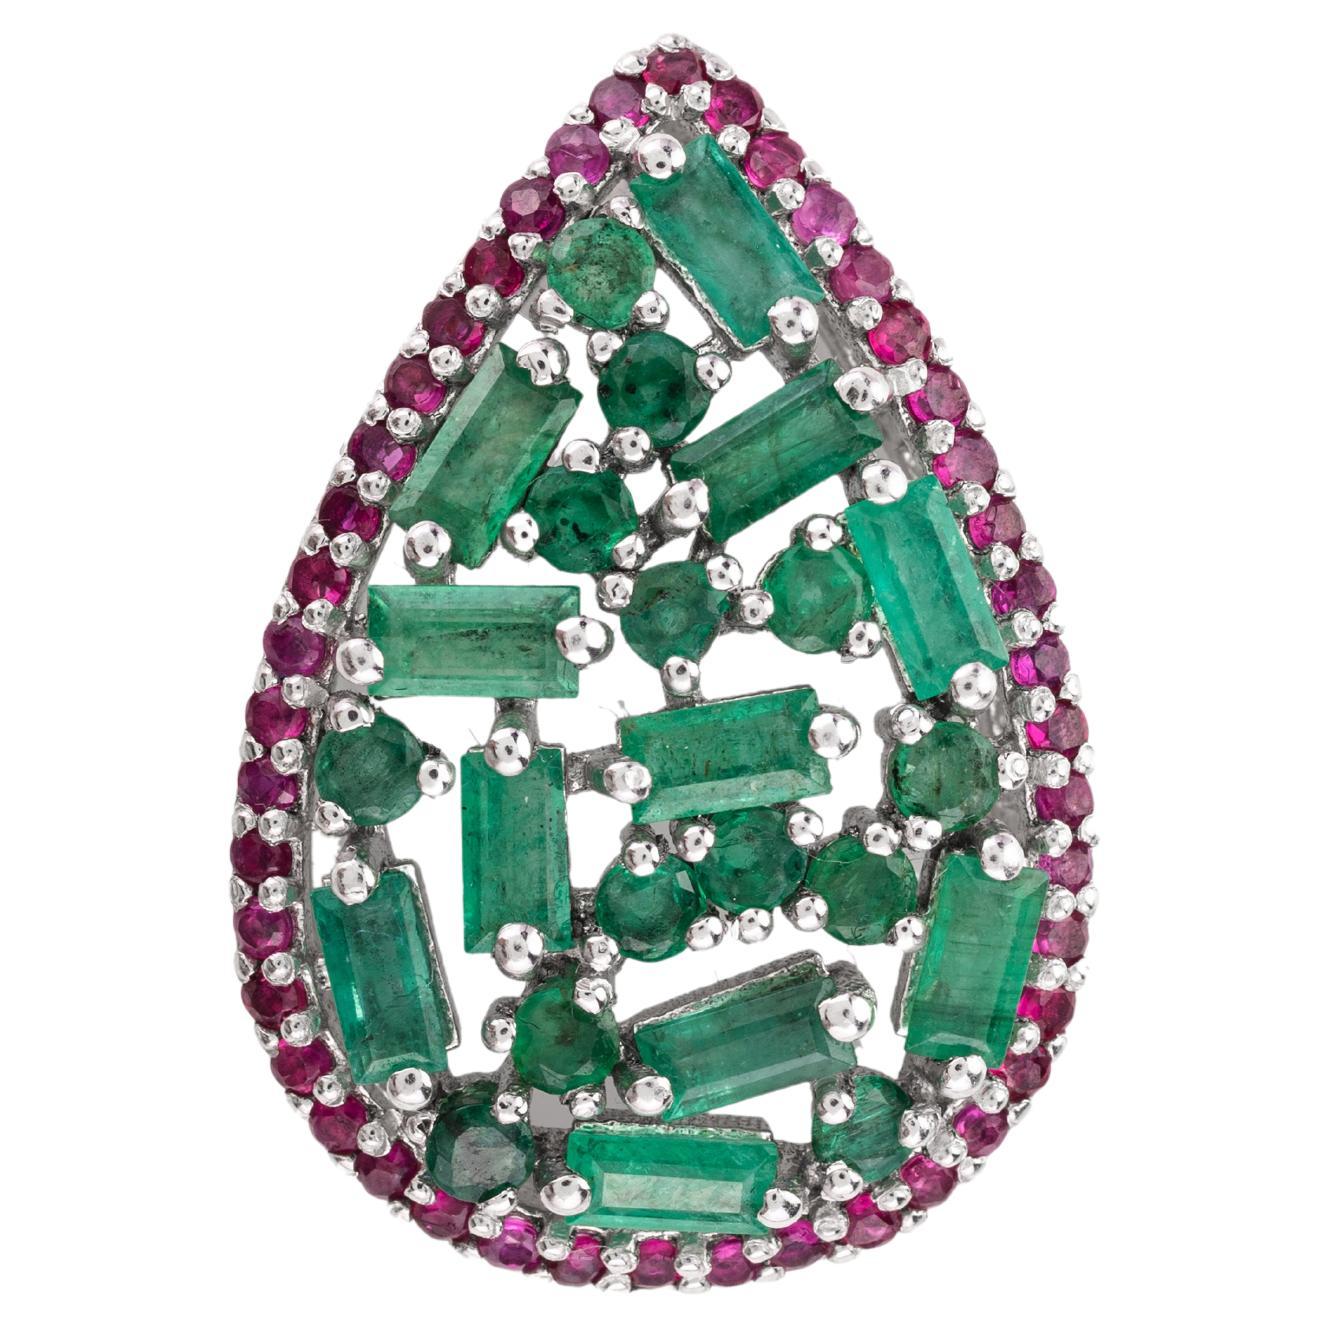 Statement Emerald Ruby Cluster Brooch Pin in Sterling Silver